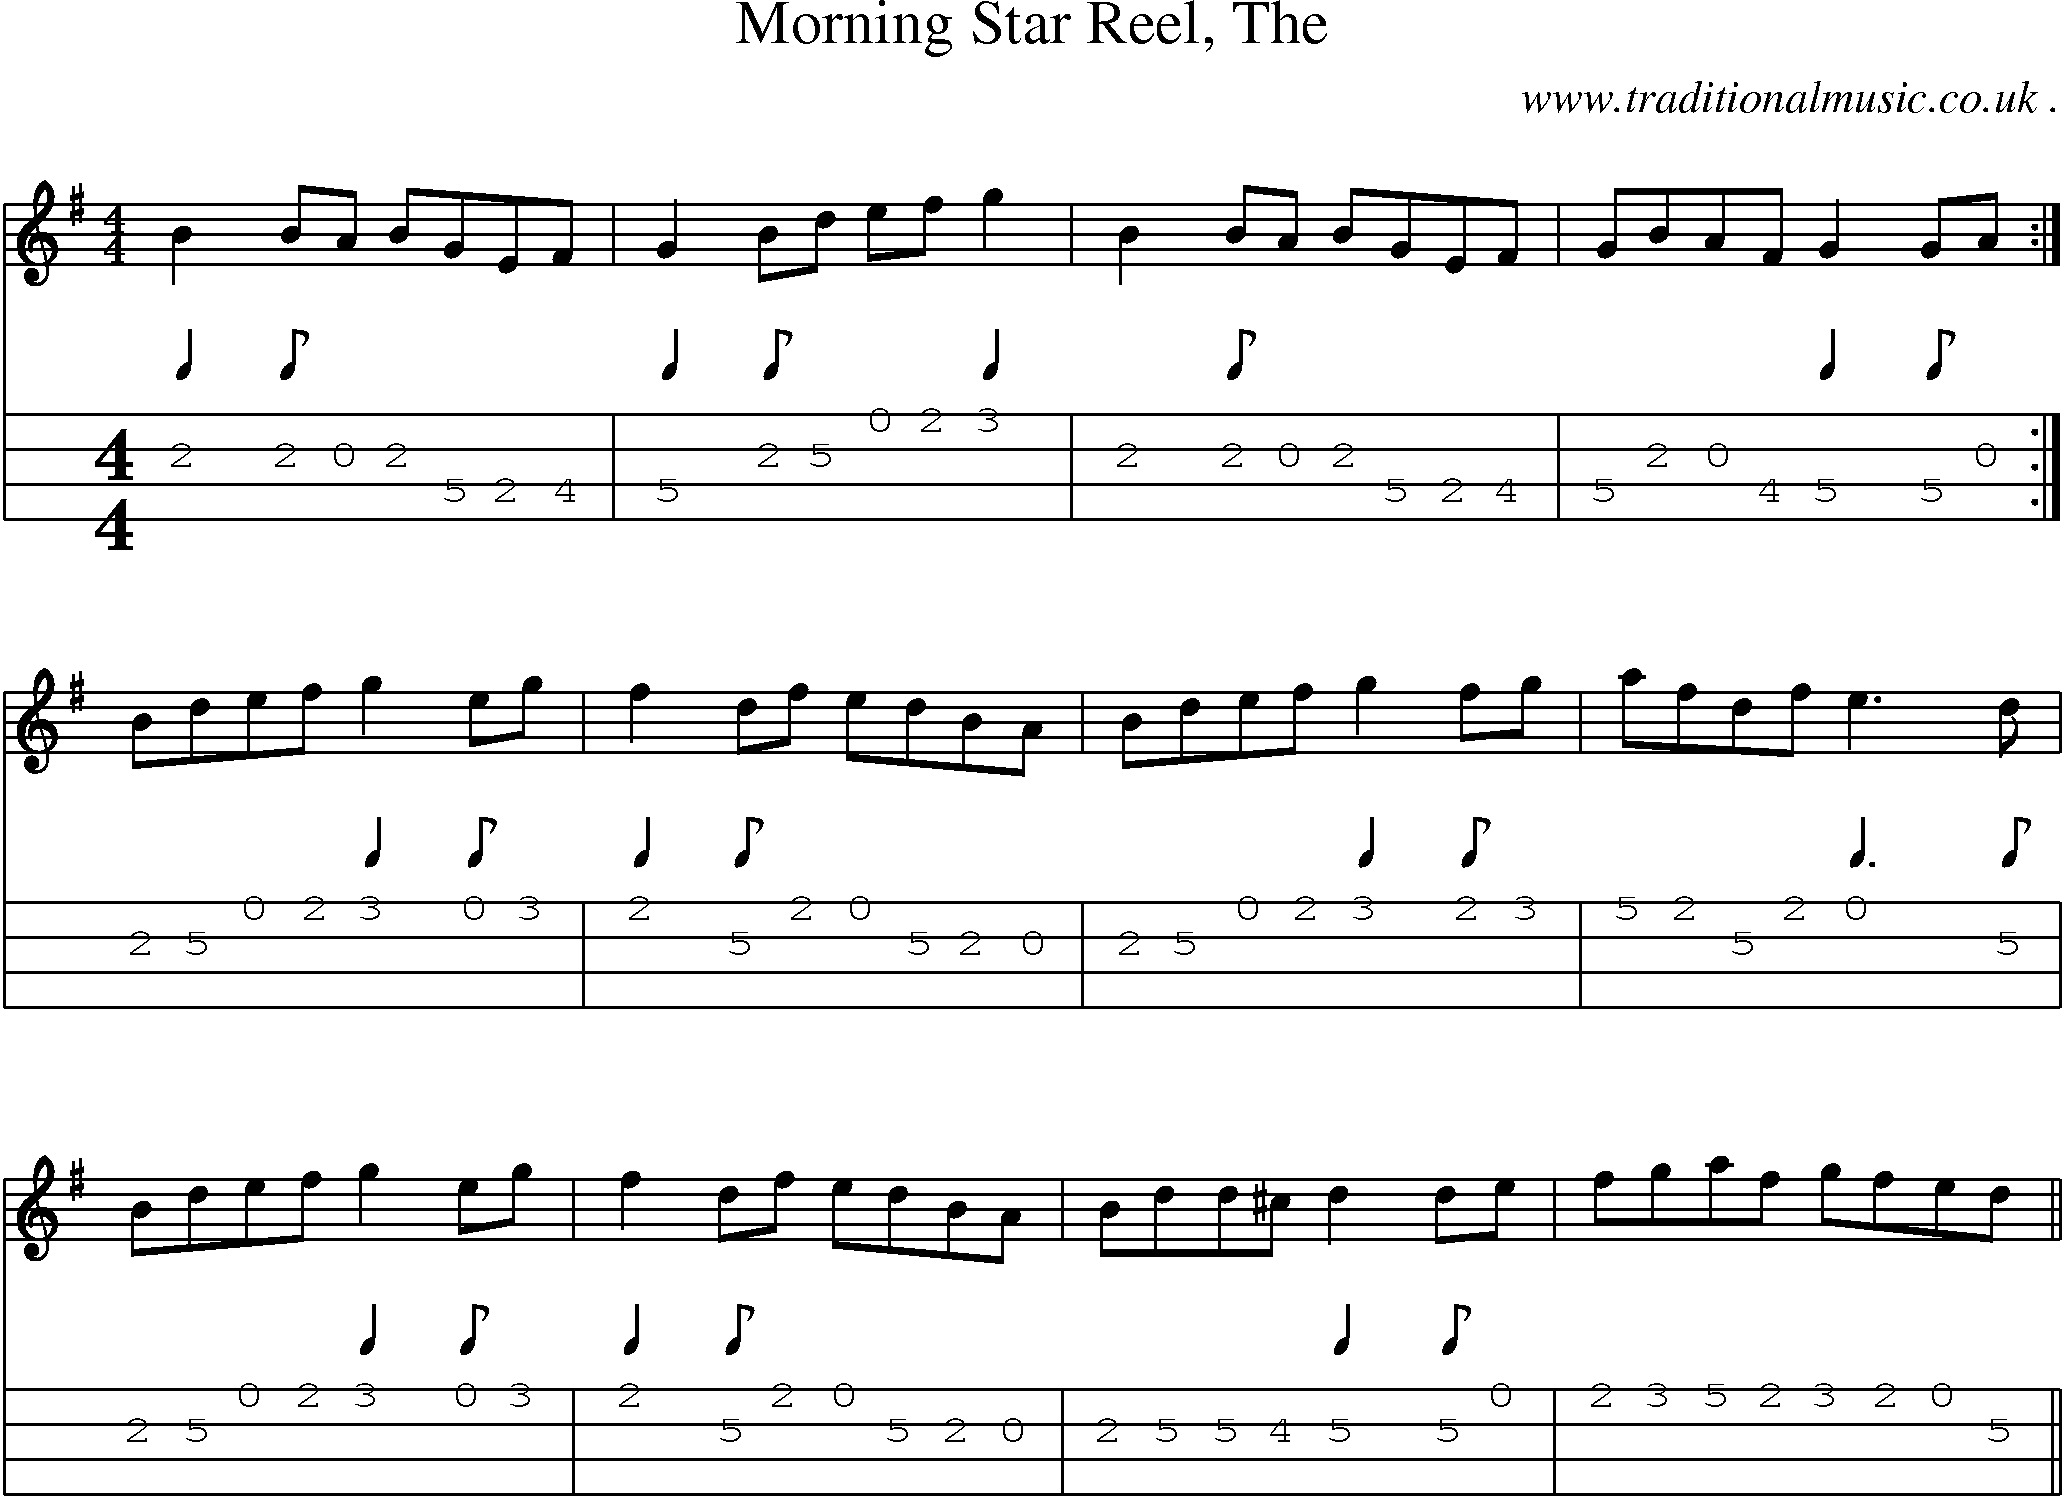 Music Score and Guitar Tabs for Morning Star Reel The